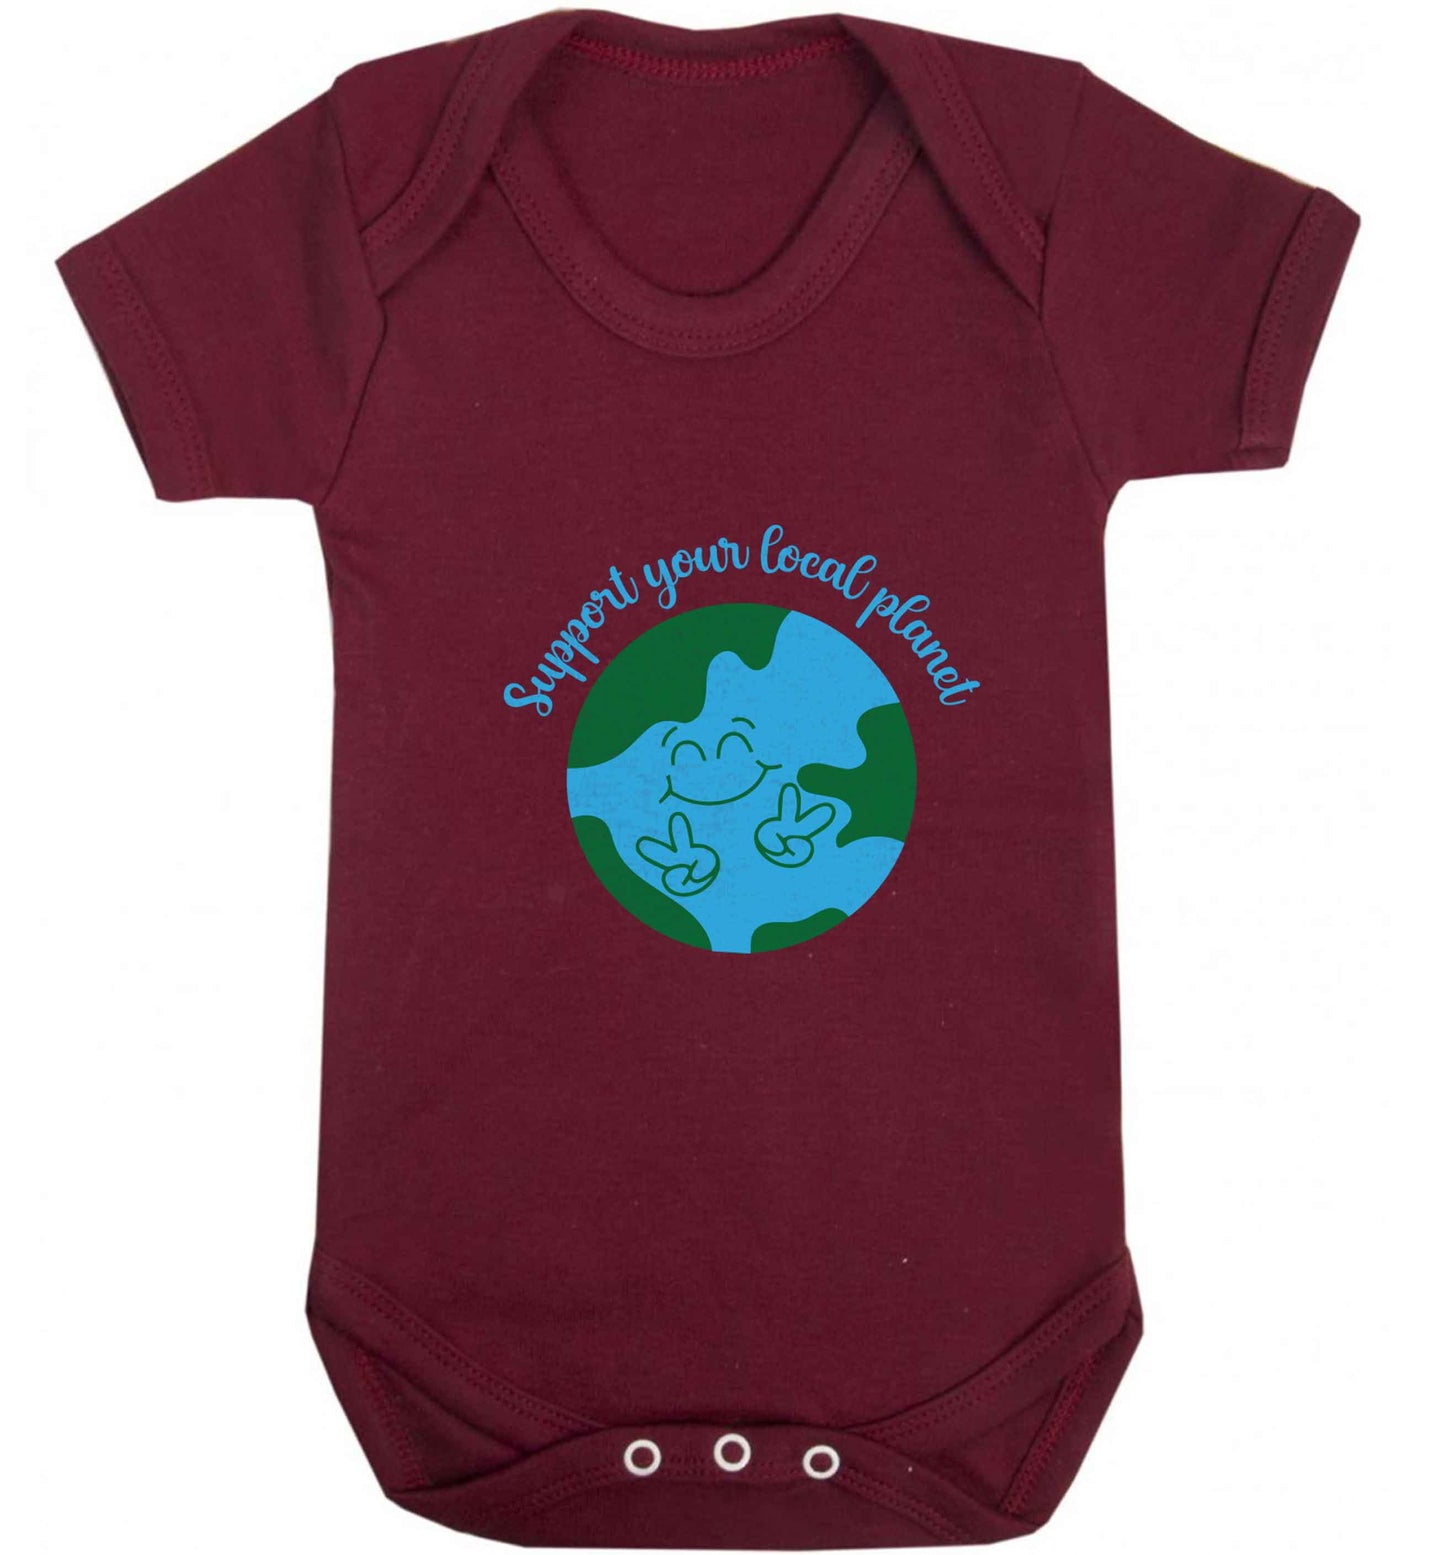 Support your local planet baby vest maroon 18-24 months